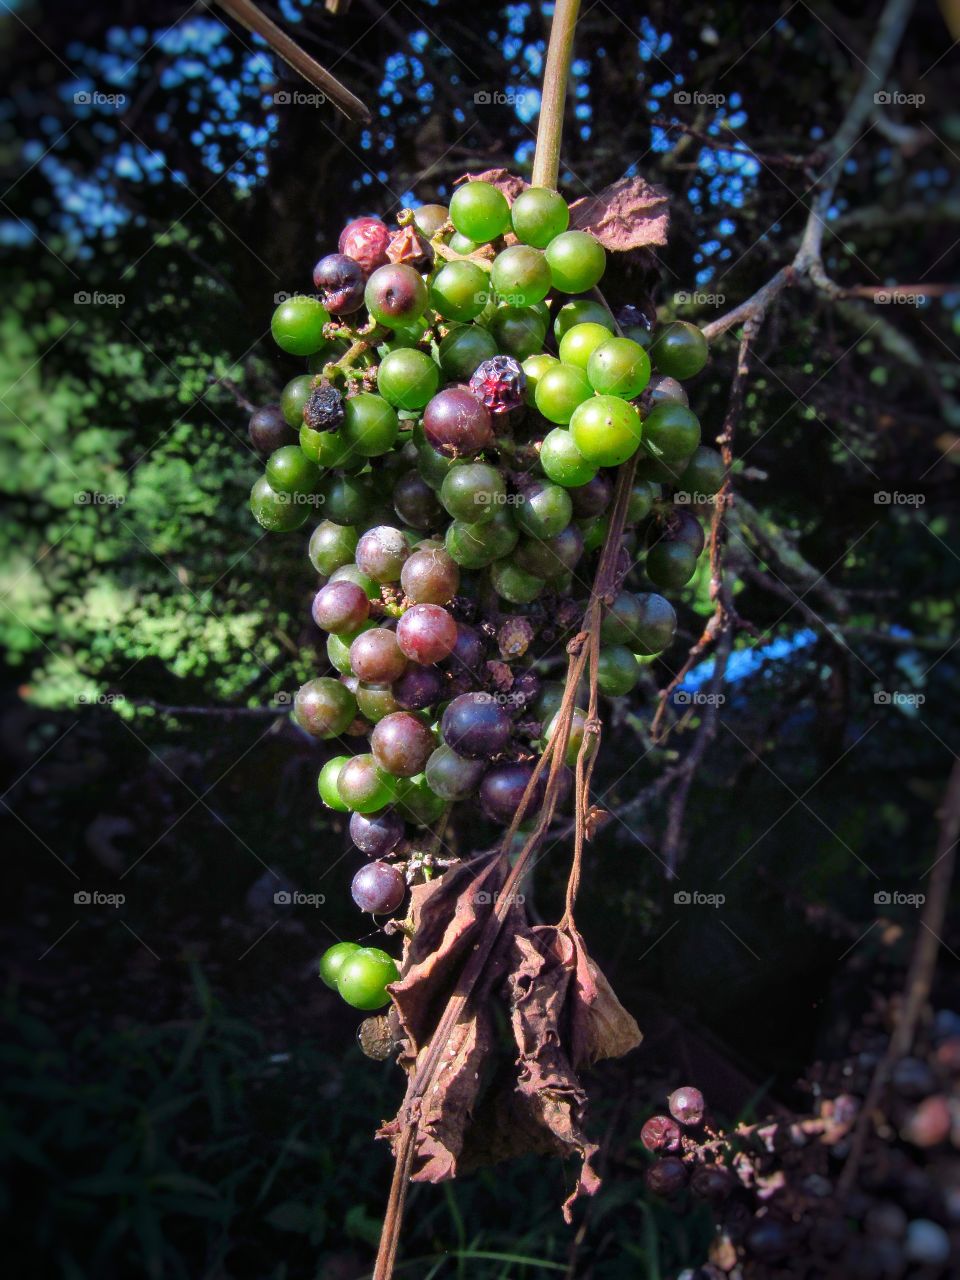 little bunch of wild grapes hanging on the vine outdoors